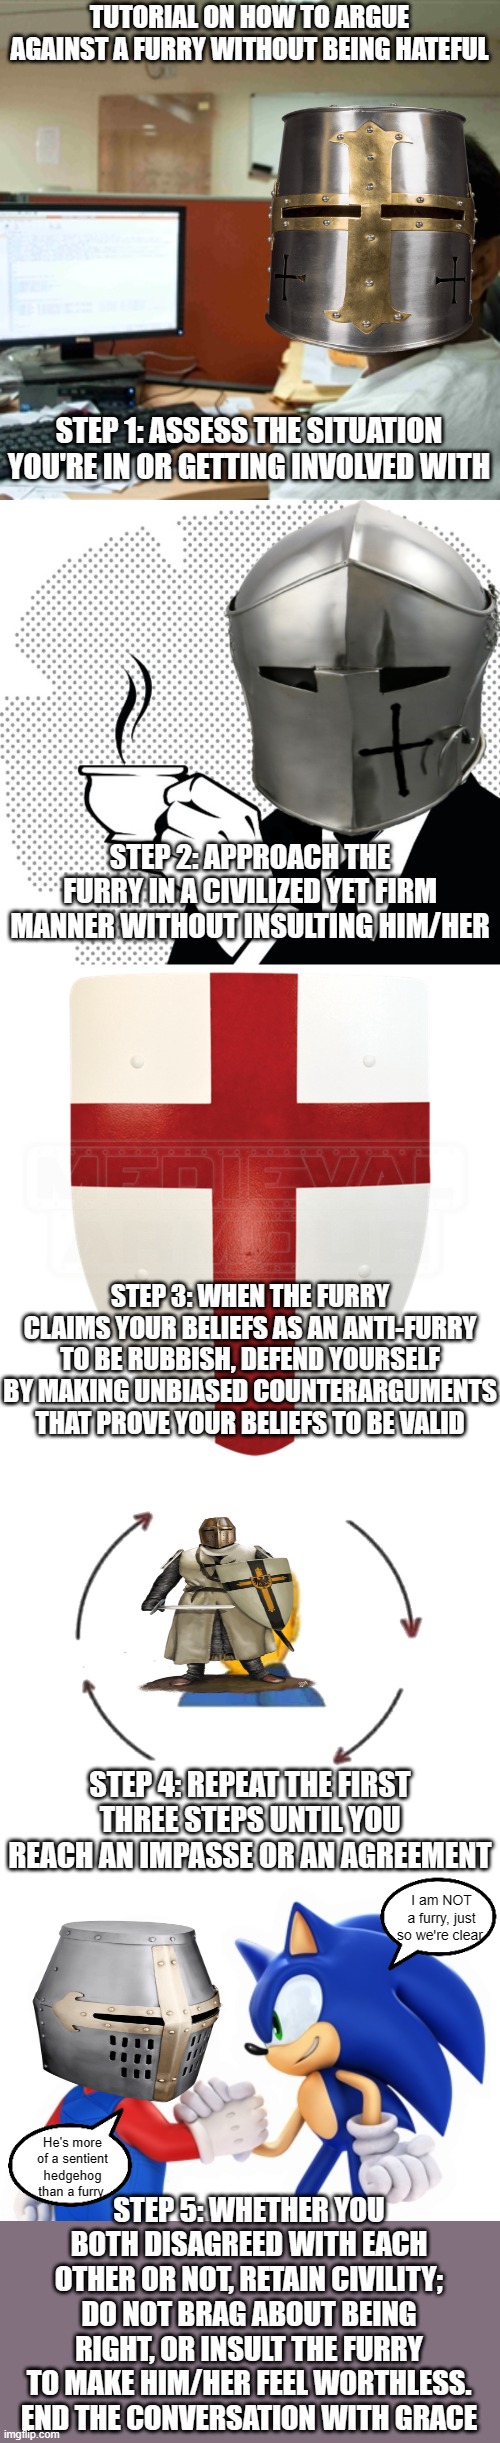 TUTORIAL: How to fight a furry. (Pacifist Route) | TUTORIAL ON HOW TO ARGUE AGAINST A FURRY WITHOUT BEING HATEFUL; STEP 1: ASSESS THE SITUATION YOU'RE IN OR GETTING INVOLVED WITH; STEP 2: APPROACH THE FURRY IN A CIVILIZED YET FIRM MANNER WITHOUT INSULTING HIM/HER; STEP 3: WHEN THE FURRY CLAIMS YOUR BELIEFS AS AN ANTI-FURRY TO BE RUBBISH, DEFEND YOURSELF BY MAKING UNBIASED COUNTERARGUMENTS THAT PROVE YOUR BELIEFS TO BE VALID; STEP 4: REPEAT THE FIRST THREE STEPS UNTIL YOU REACH AN IMPASSE OR AN AGREEMENT; I am NOT a furry, just so we're clear. STEP 5: WHETHER YOU BOTH DISAGREED WITH EACH OTHER OR NOT, RETAIN CIVILITY; DO NOT BRAG ABOUT BEING RIGHT, OR INSULT THE FURRY TO MAKE HIM/HER FEEL WORTHLESS. END THE CONVERSATION WITH GRACE; He's more of a sentient hedgehog than a furry. | image tagged in indian guy compuer tutorial - it,coffee crusader,crusader shield,i meet someone we talk they leave,mario and sonic,anti furry | made w/ Imgflip meme maker